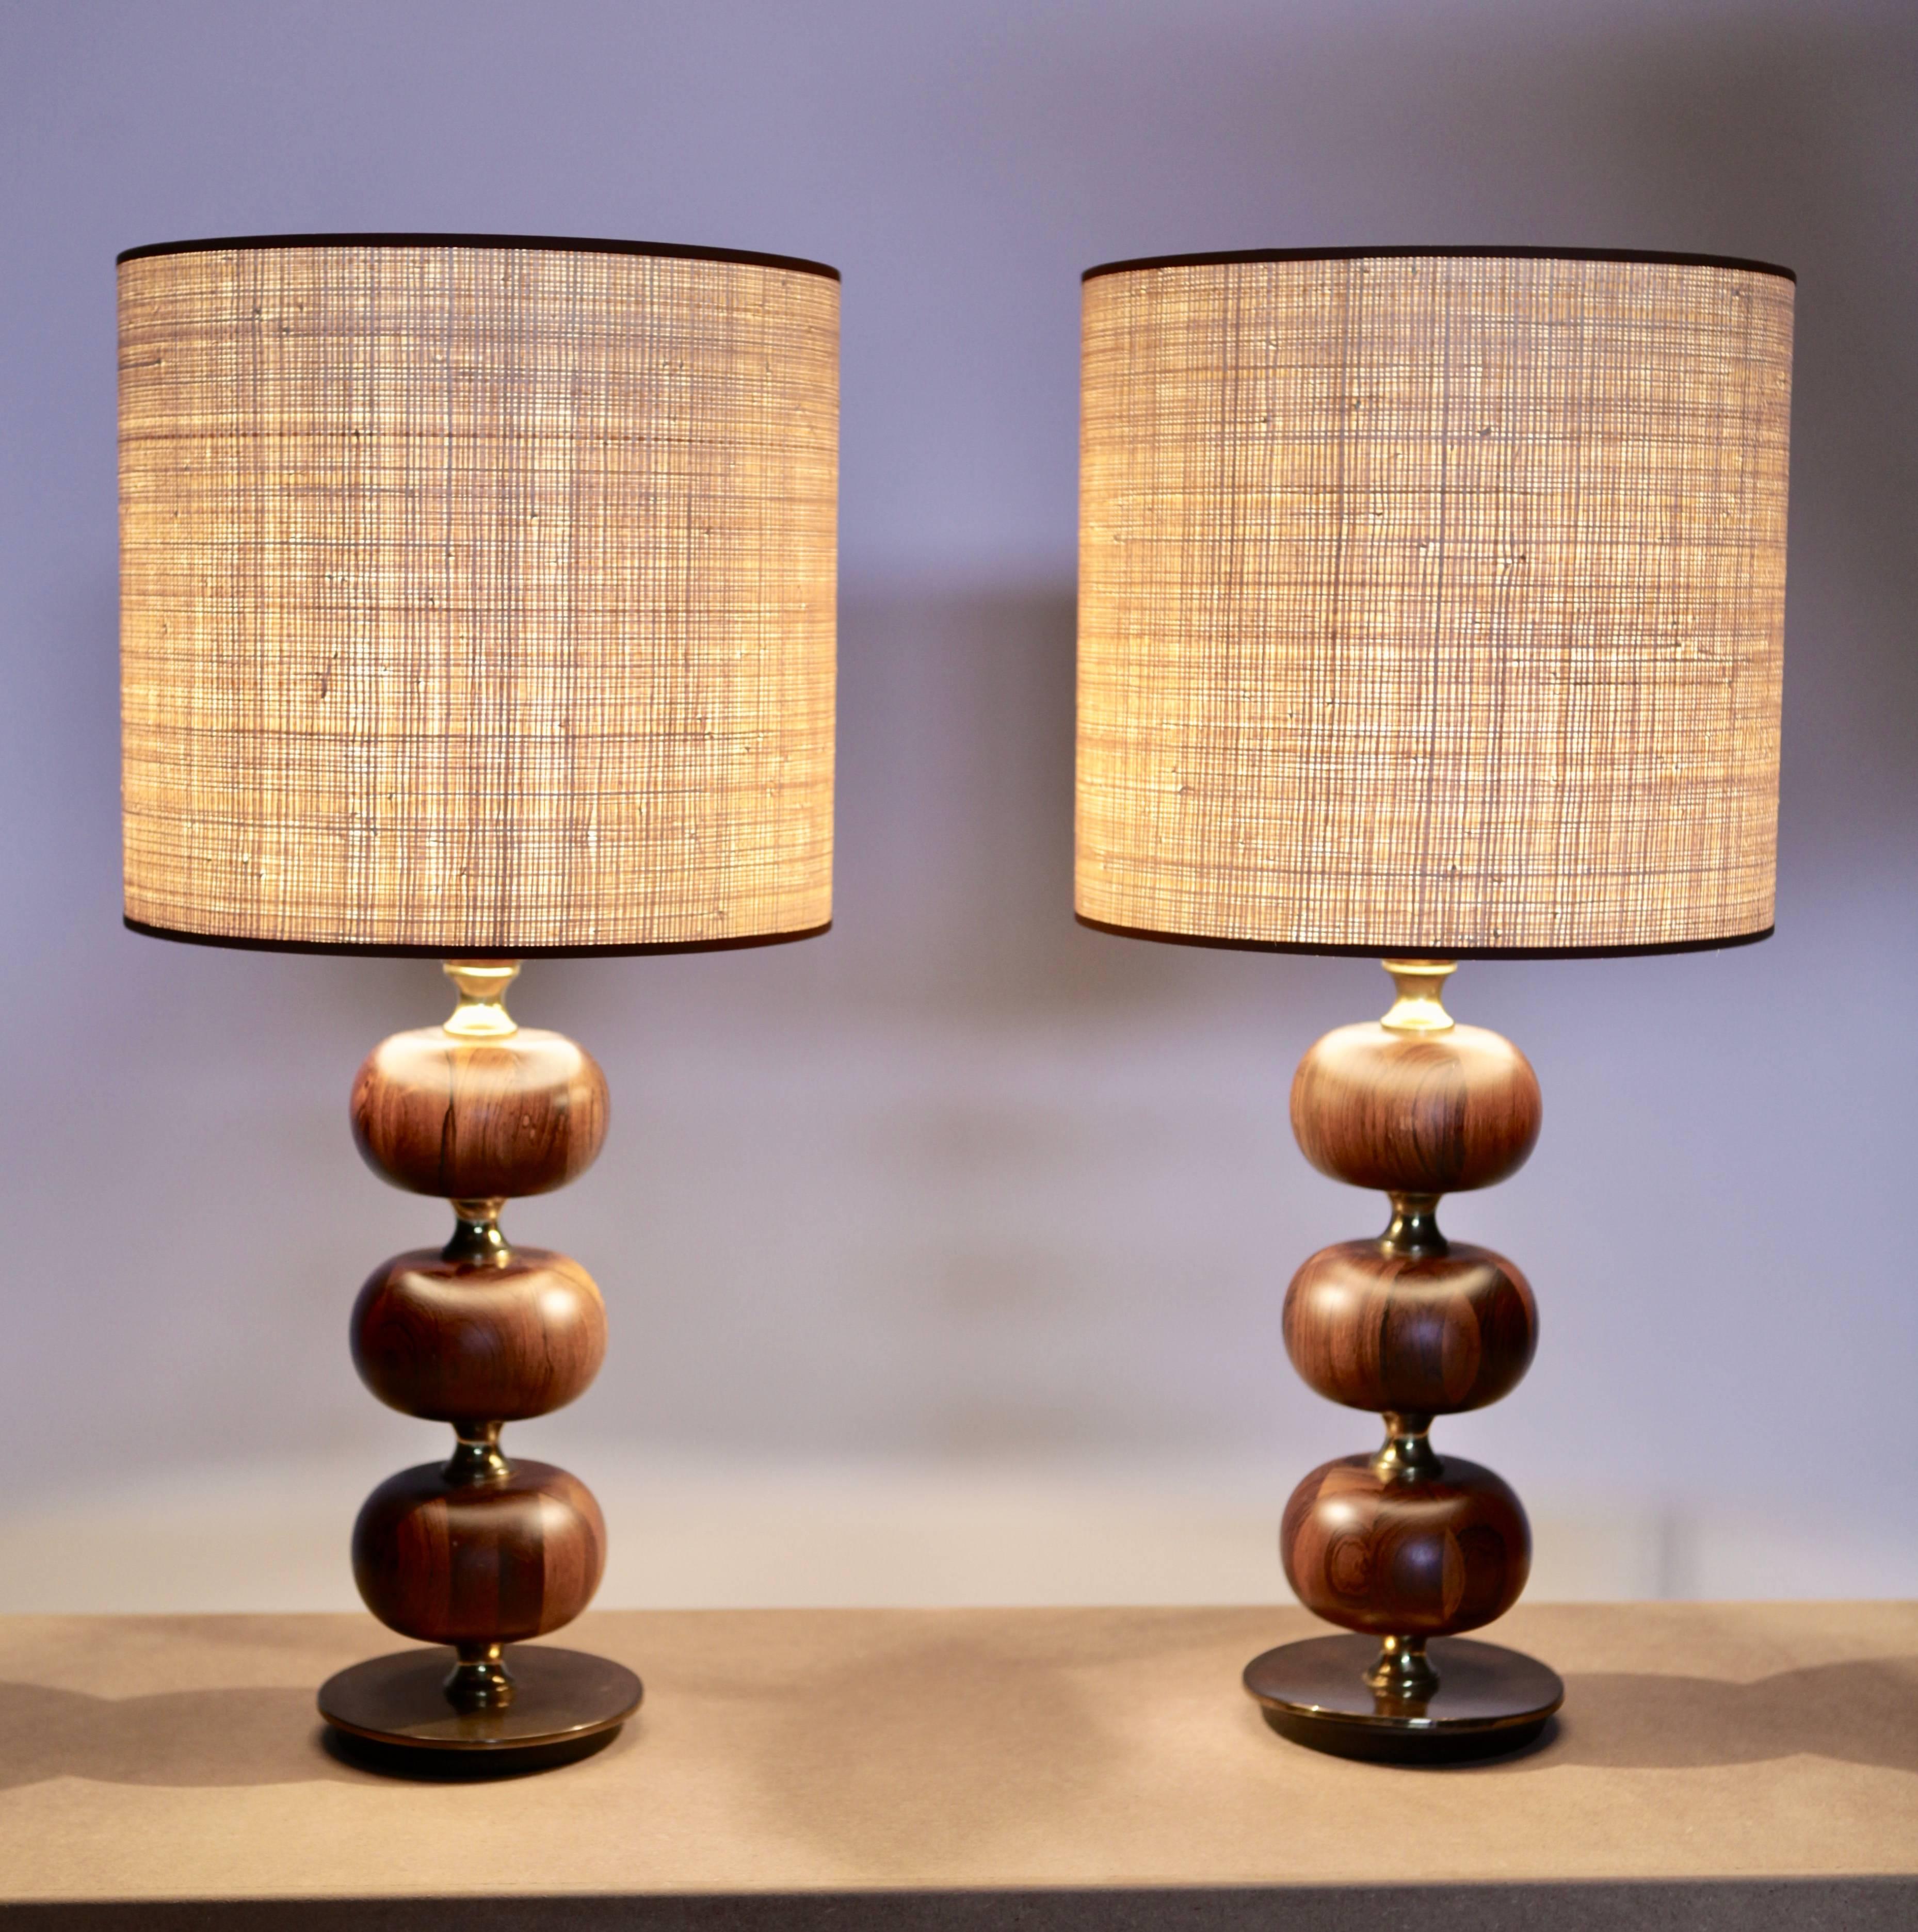 Excellent pair of table lamps in rosewood and brass, designed by Henrik Blomquist, and manufactured by Tranås Stilarmatur in Sweden the 1960s.
Handmade new Raffia Shades.